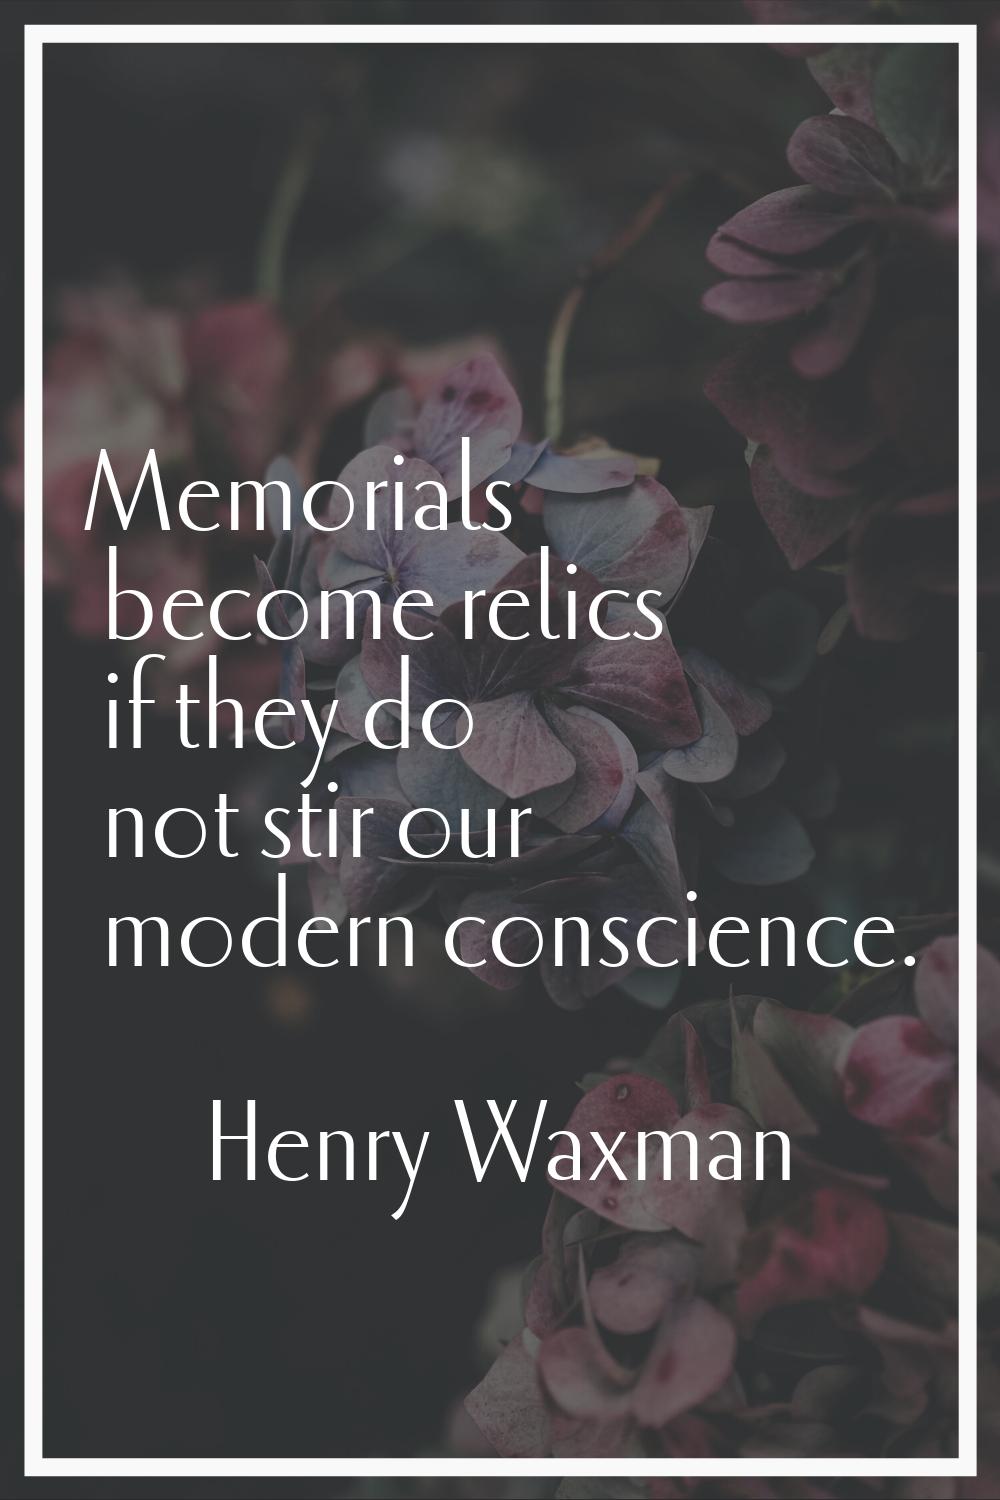 Memorials become relics if they do not stir our modern conscience.